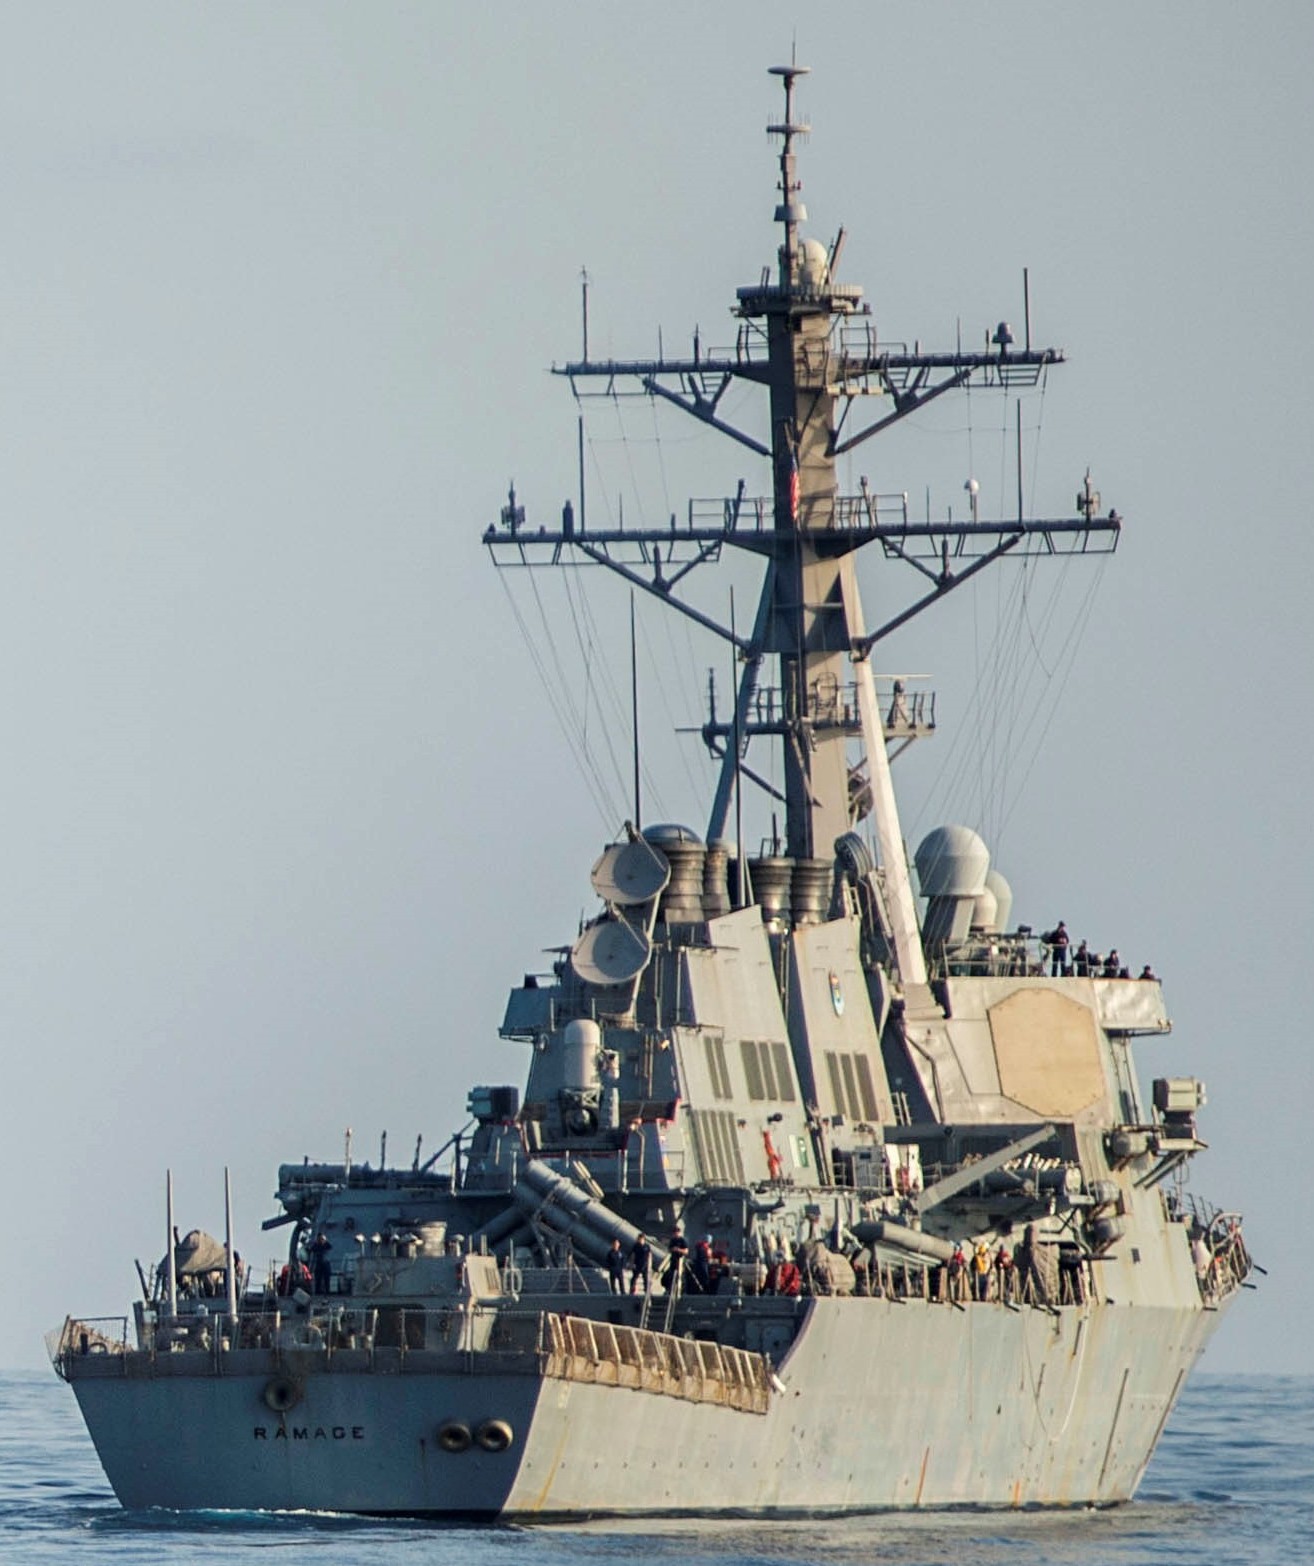 ddg-61 uss ramage guided missile destroyer arleigh burke class aegis us navy 18